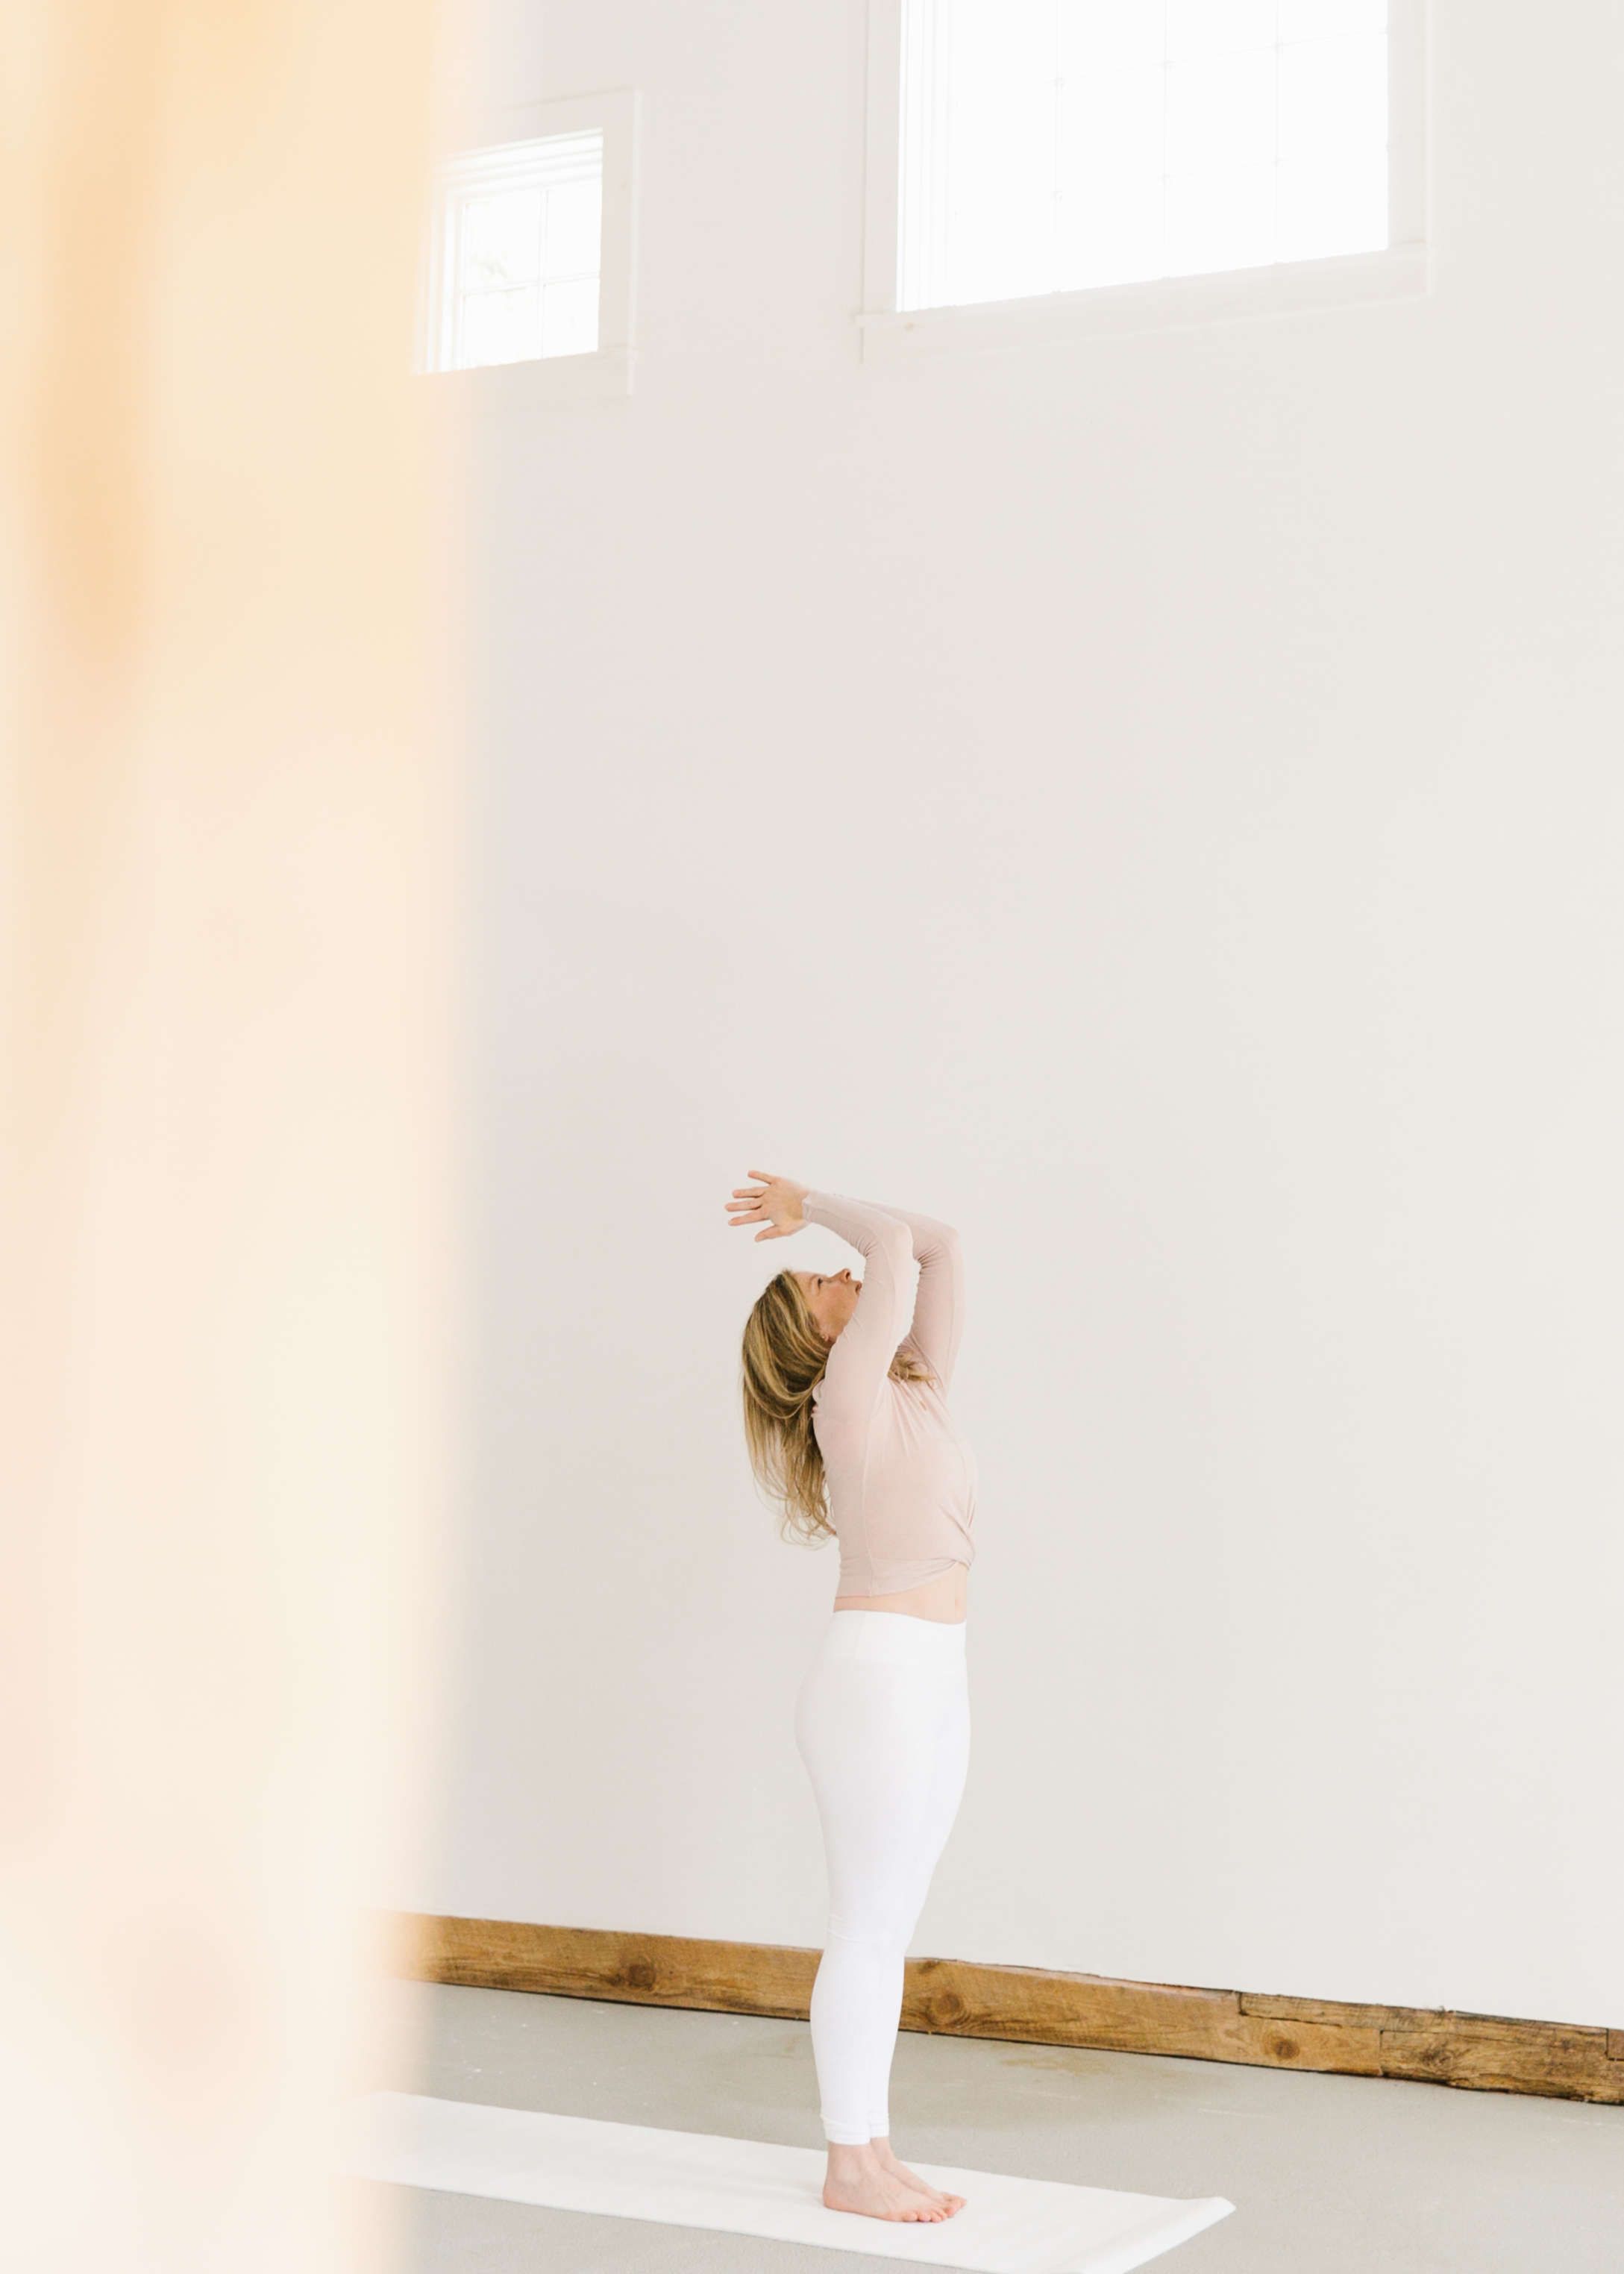 woman practicing yoga wearing white pants and blush top seen behind pillar against large white wall, two windows above